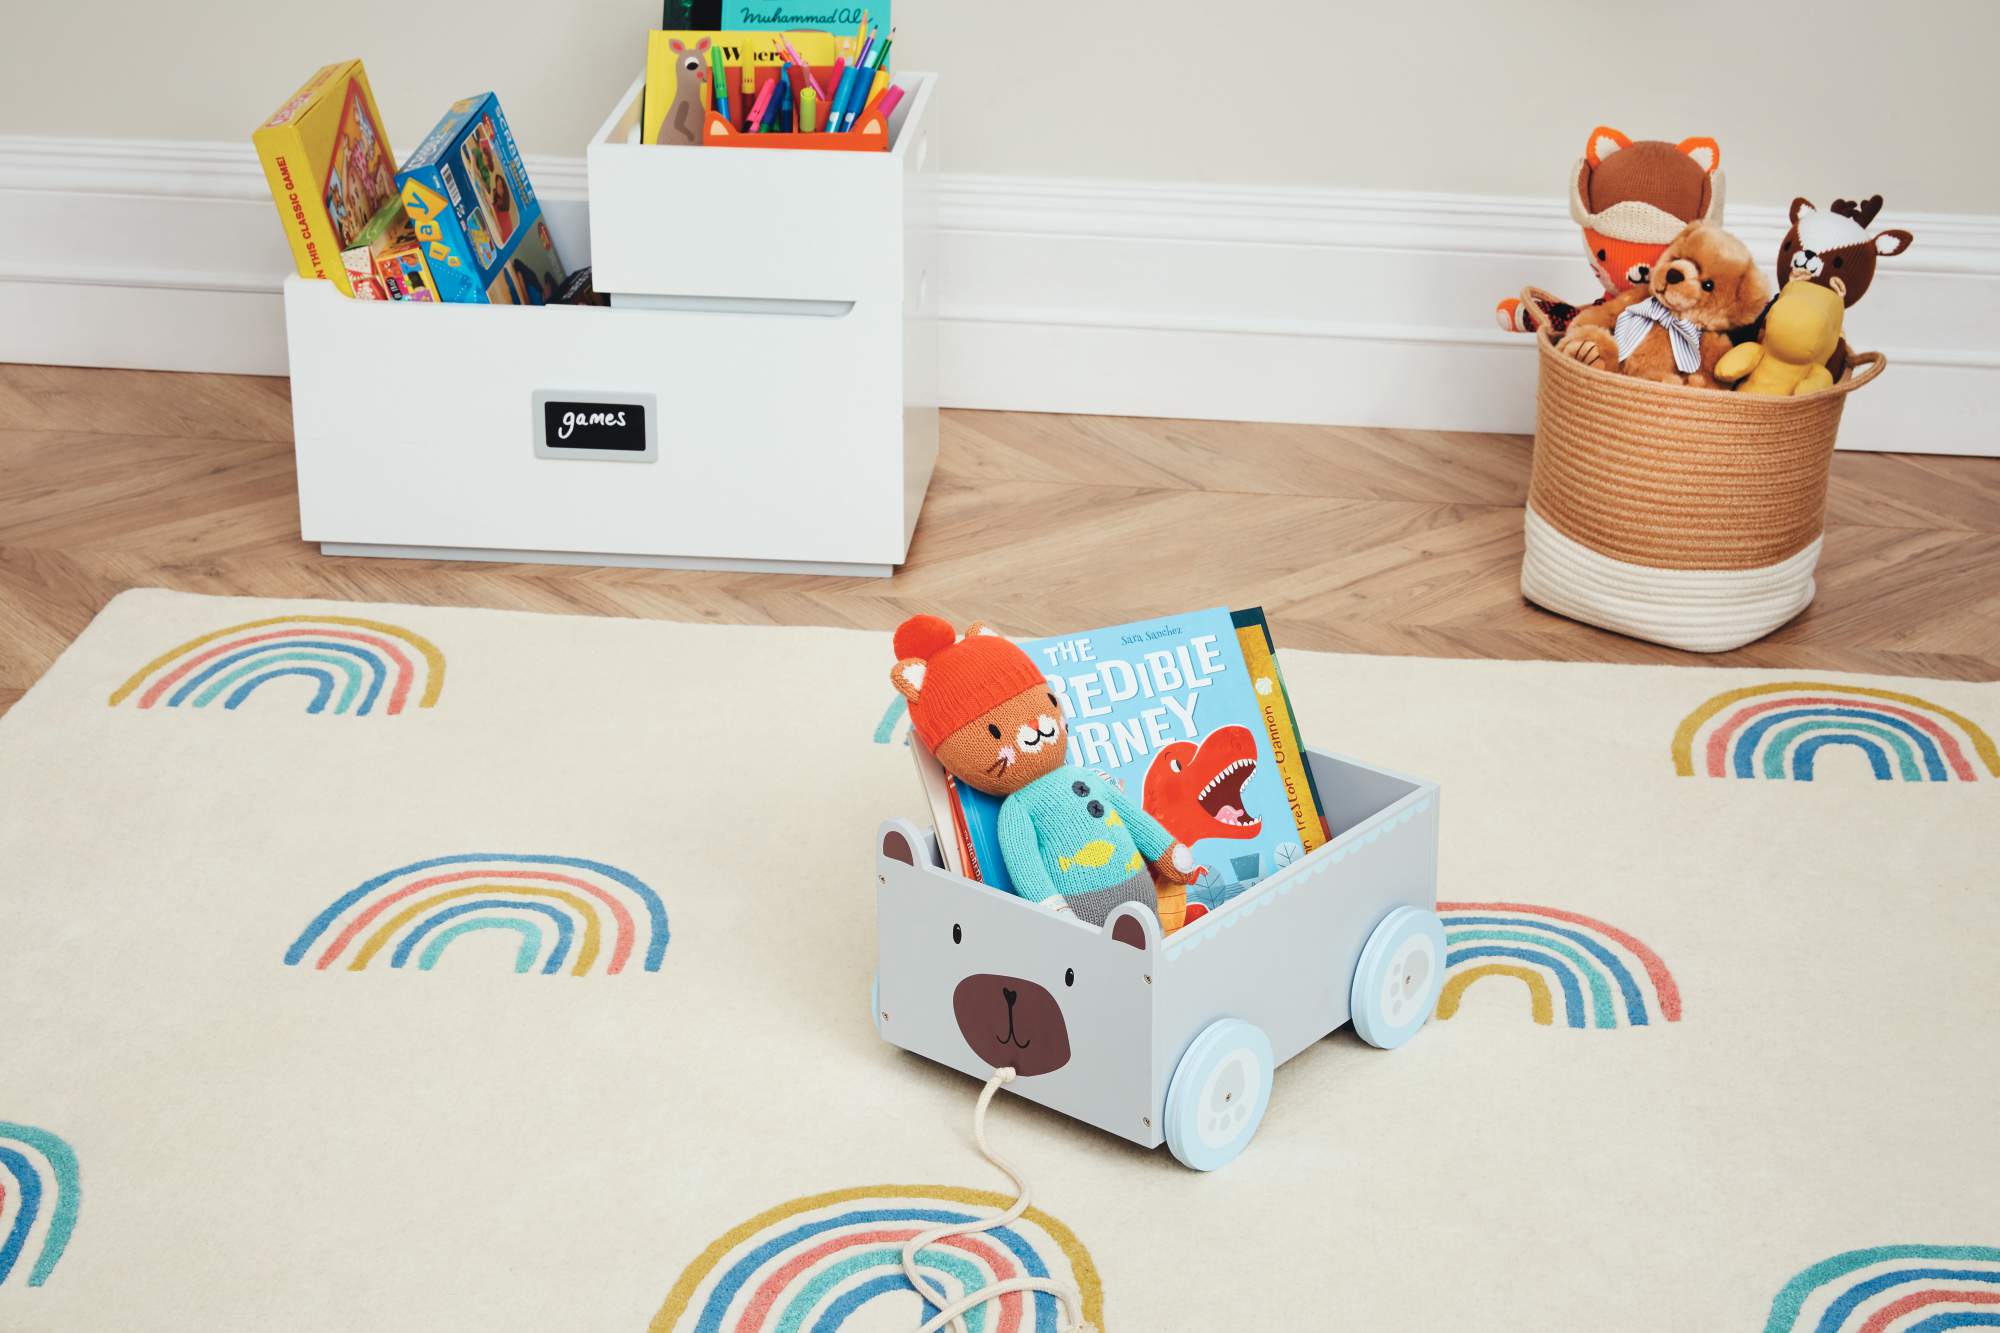 Celebrate World Book Day with a rainbow-themed book nook